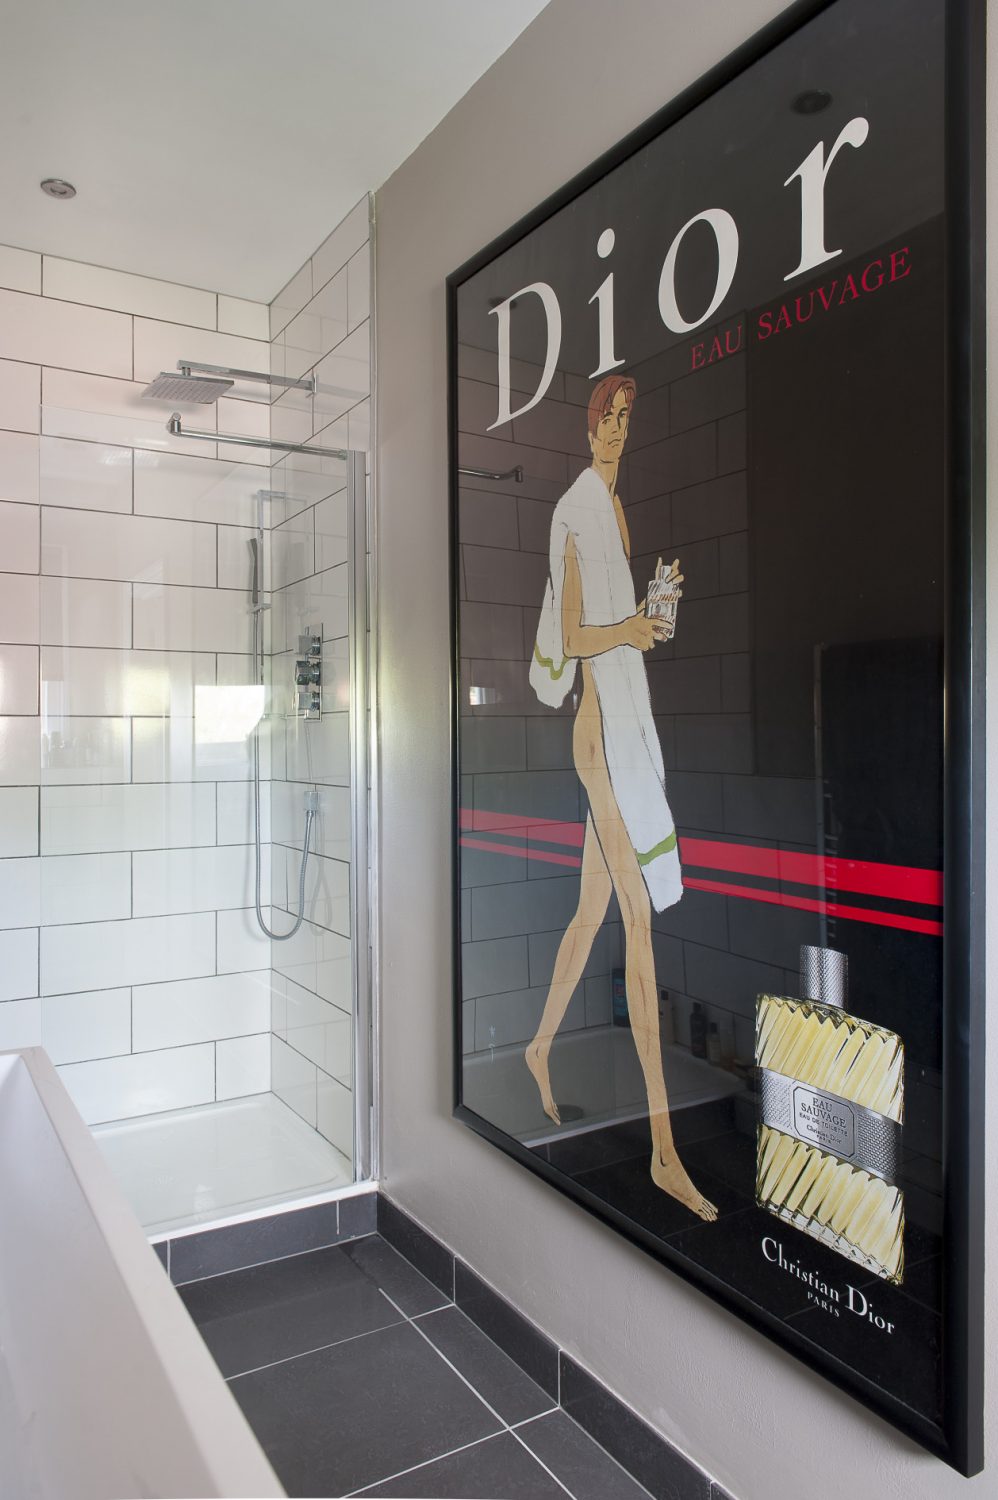 An original Dior poster is all that is needed to decorate the en suite shower room